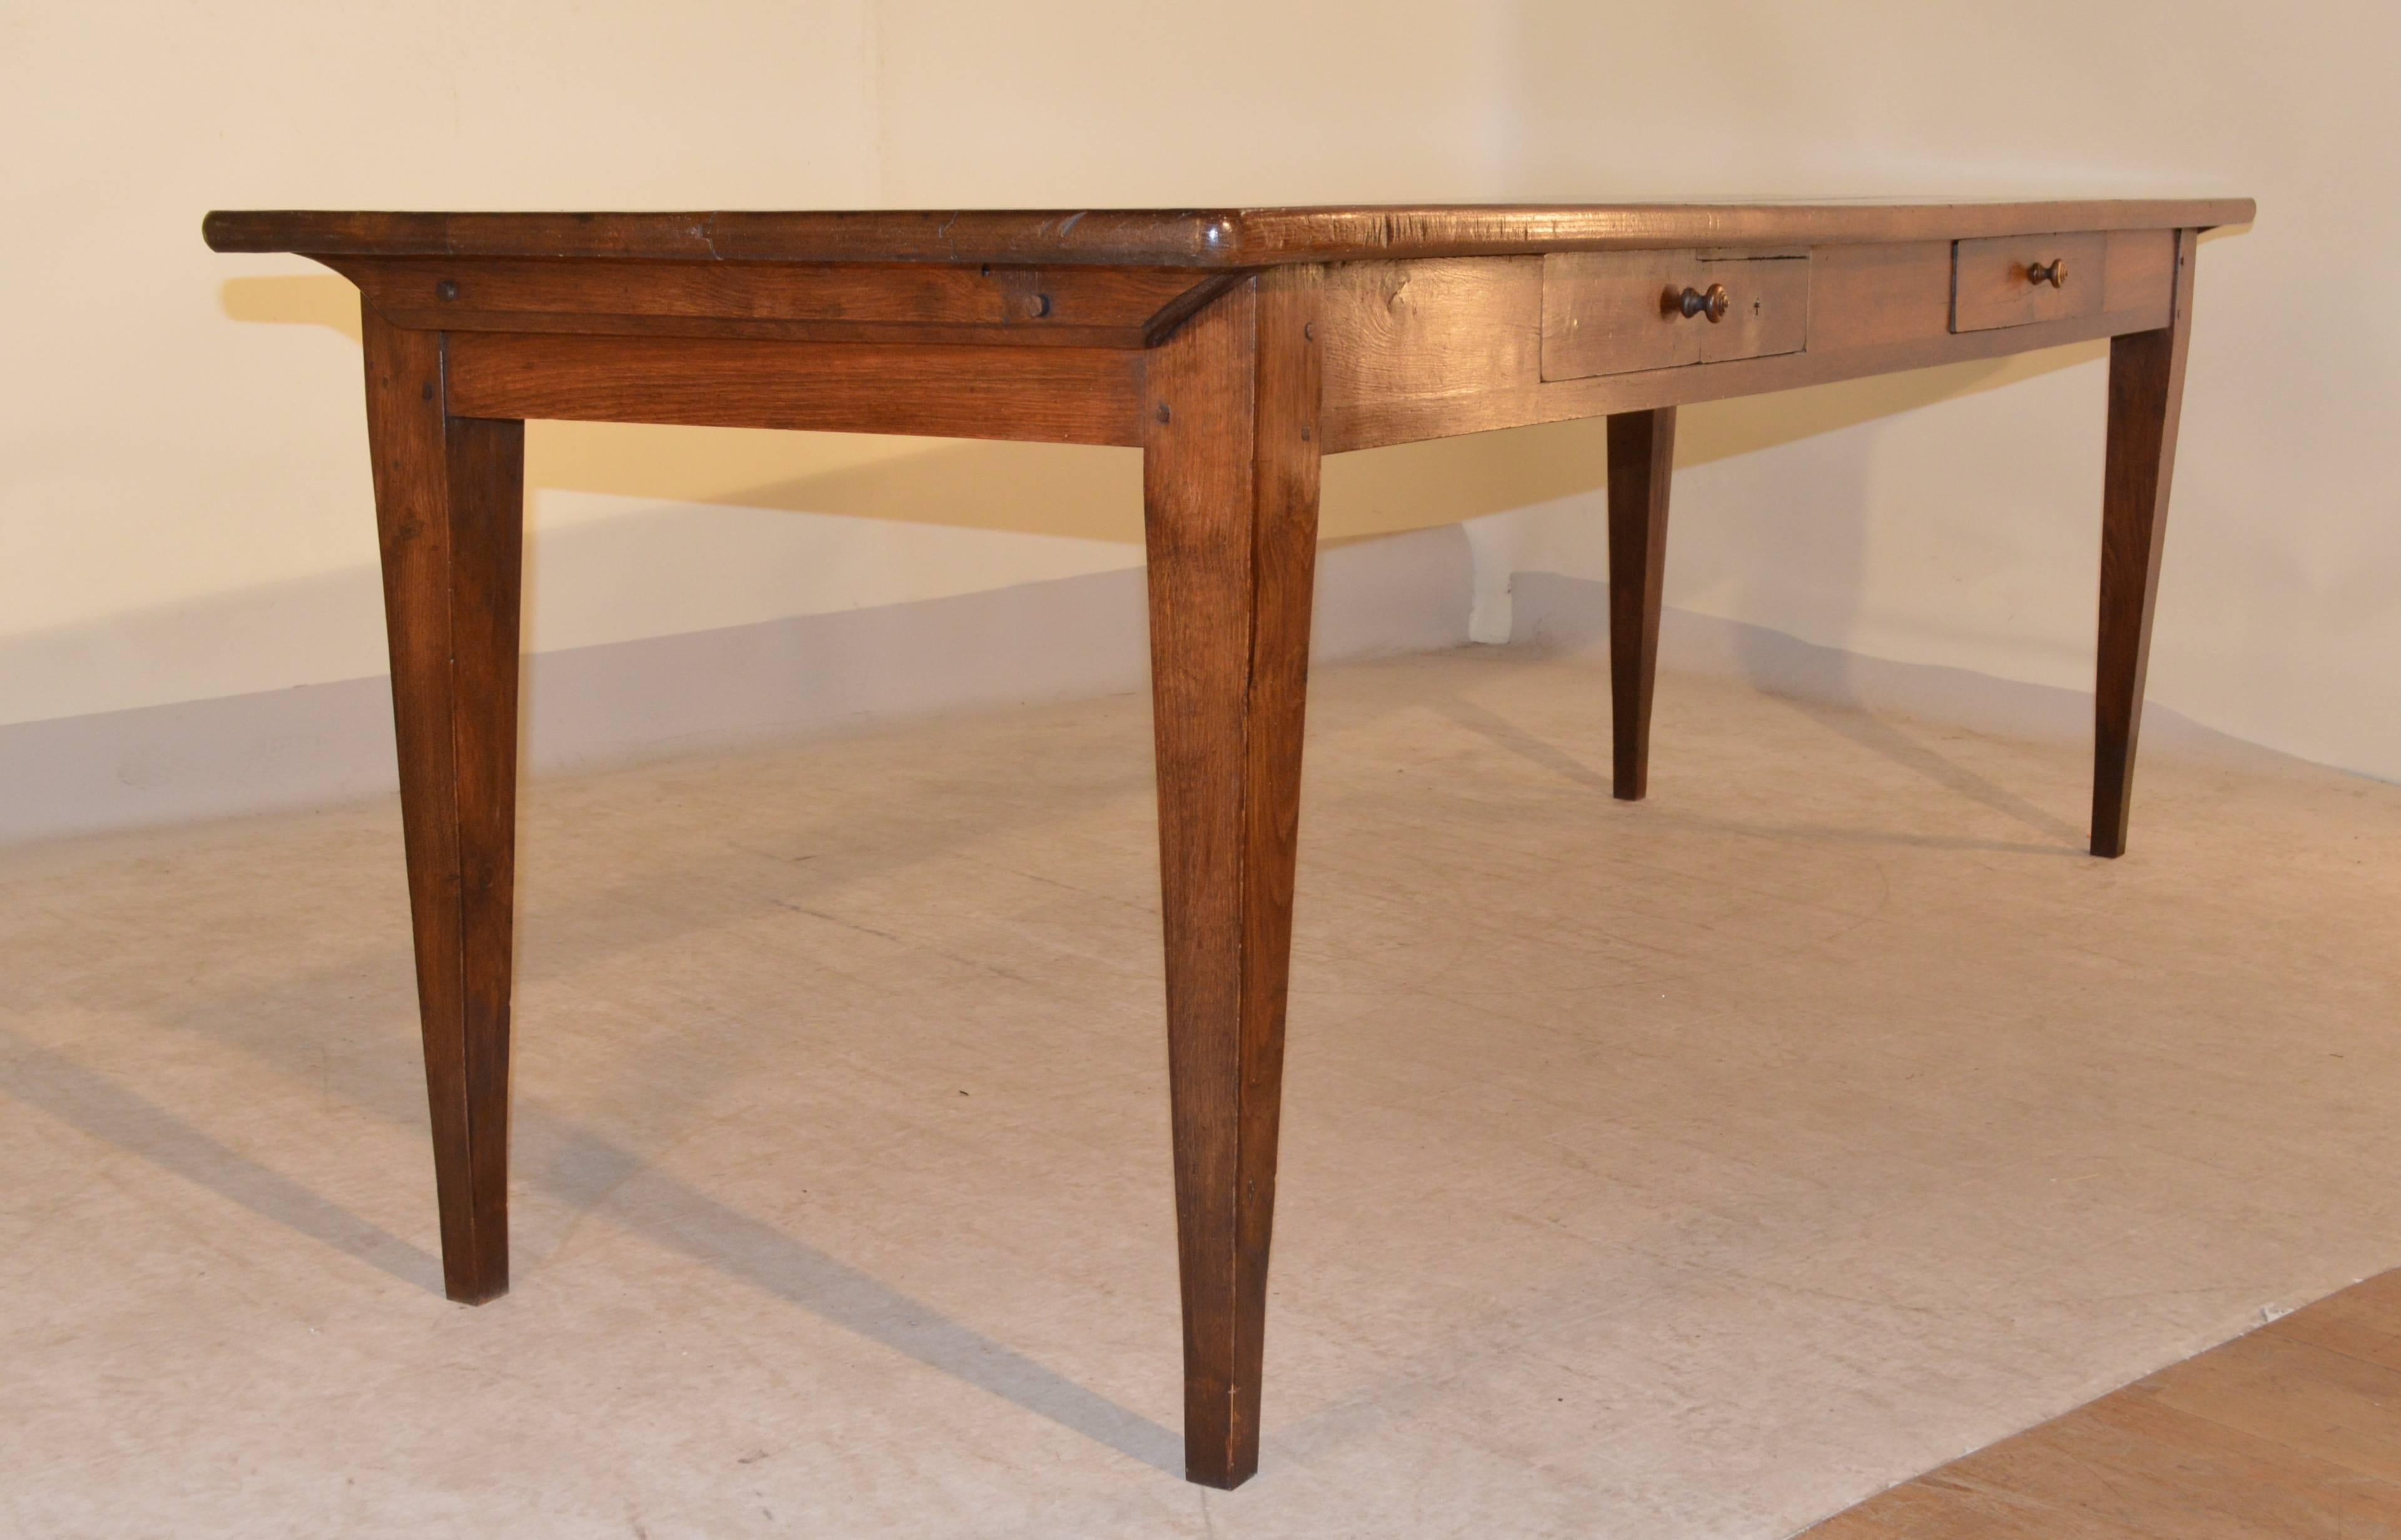 Rustic 19th Century French Harvest Table